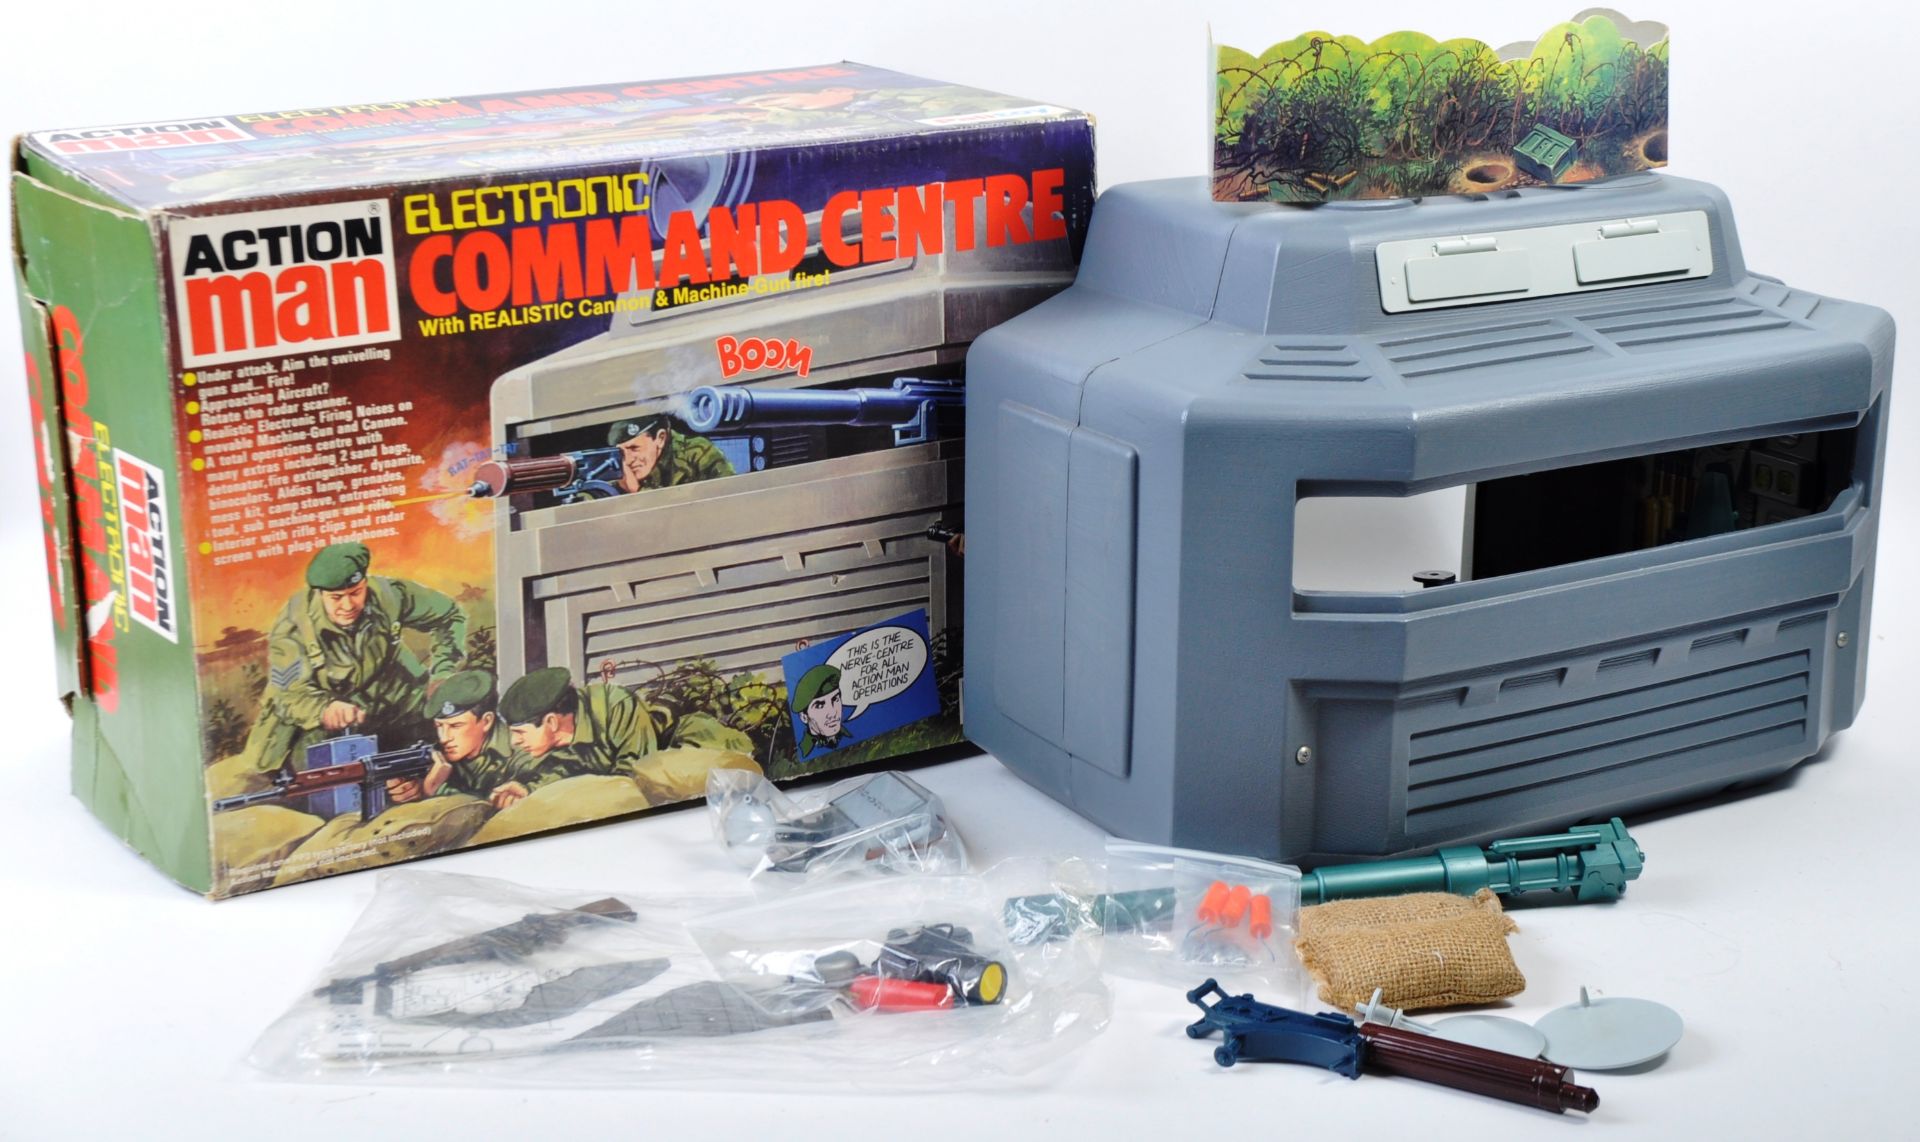 RARE PALITOY ACTION MAN ELECTRONIC COMMAND CENTRE PLAYSET